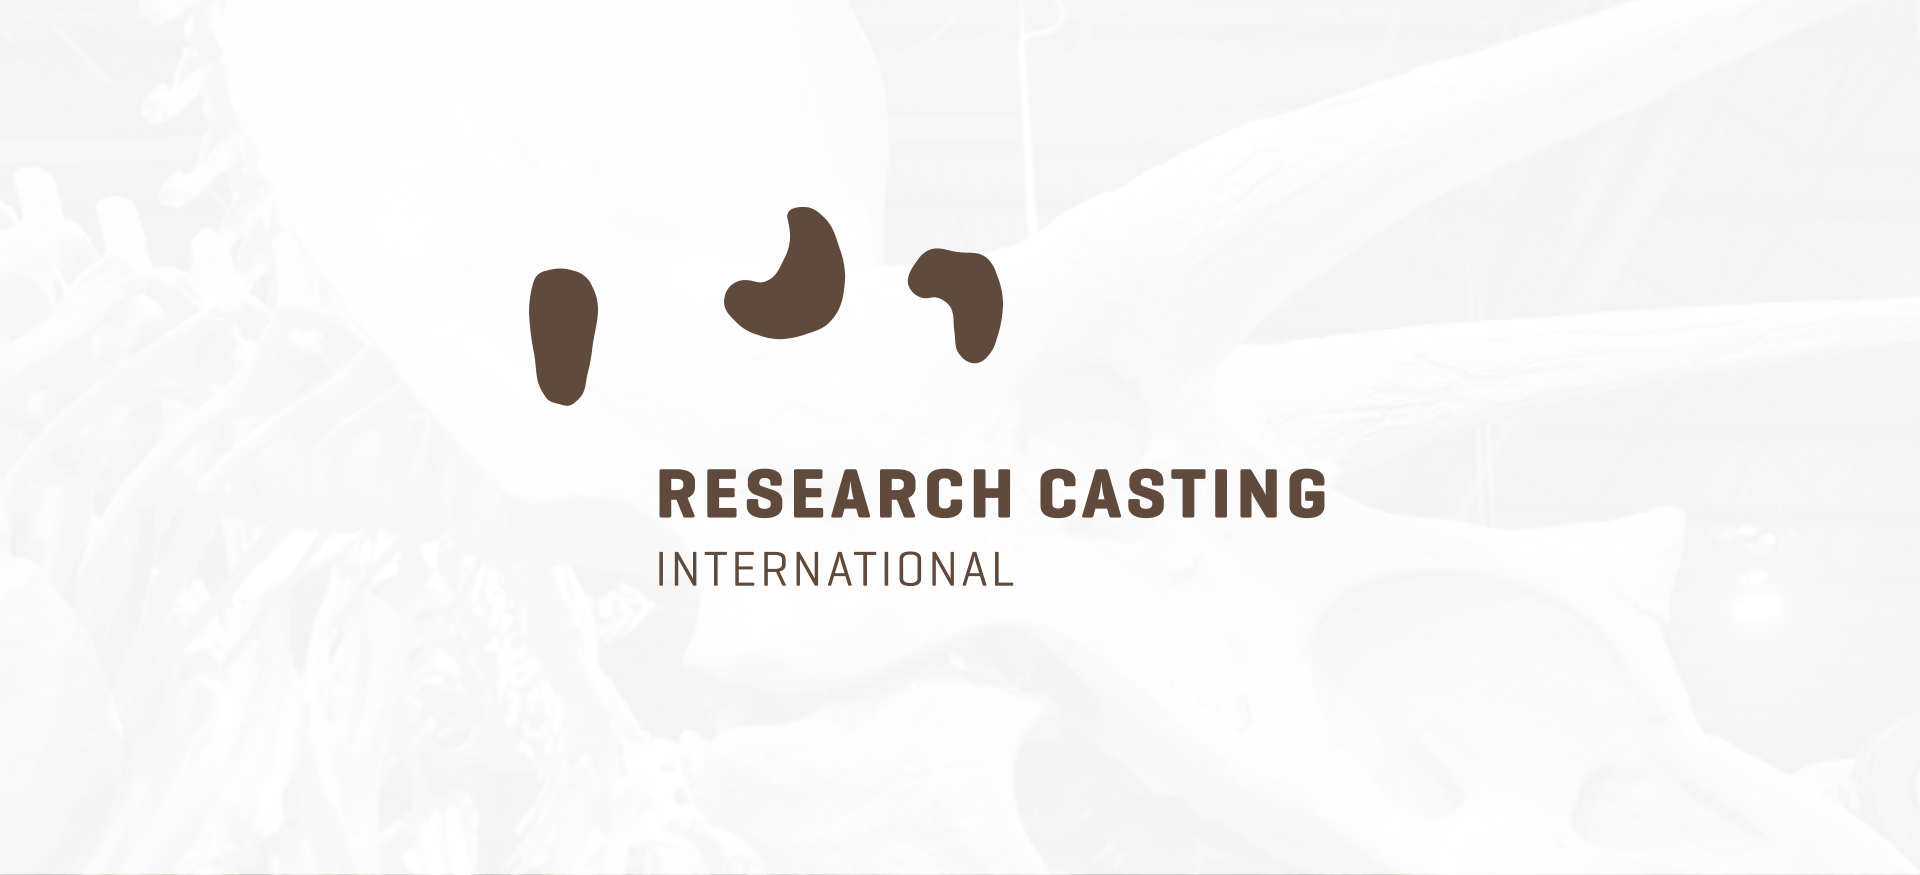 Research Casting International 